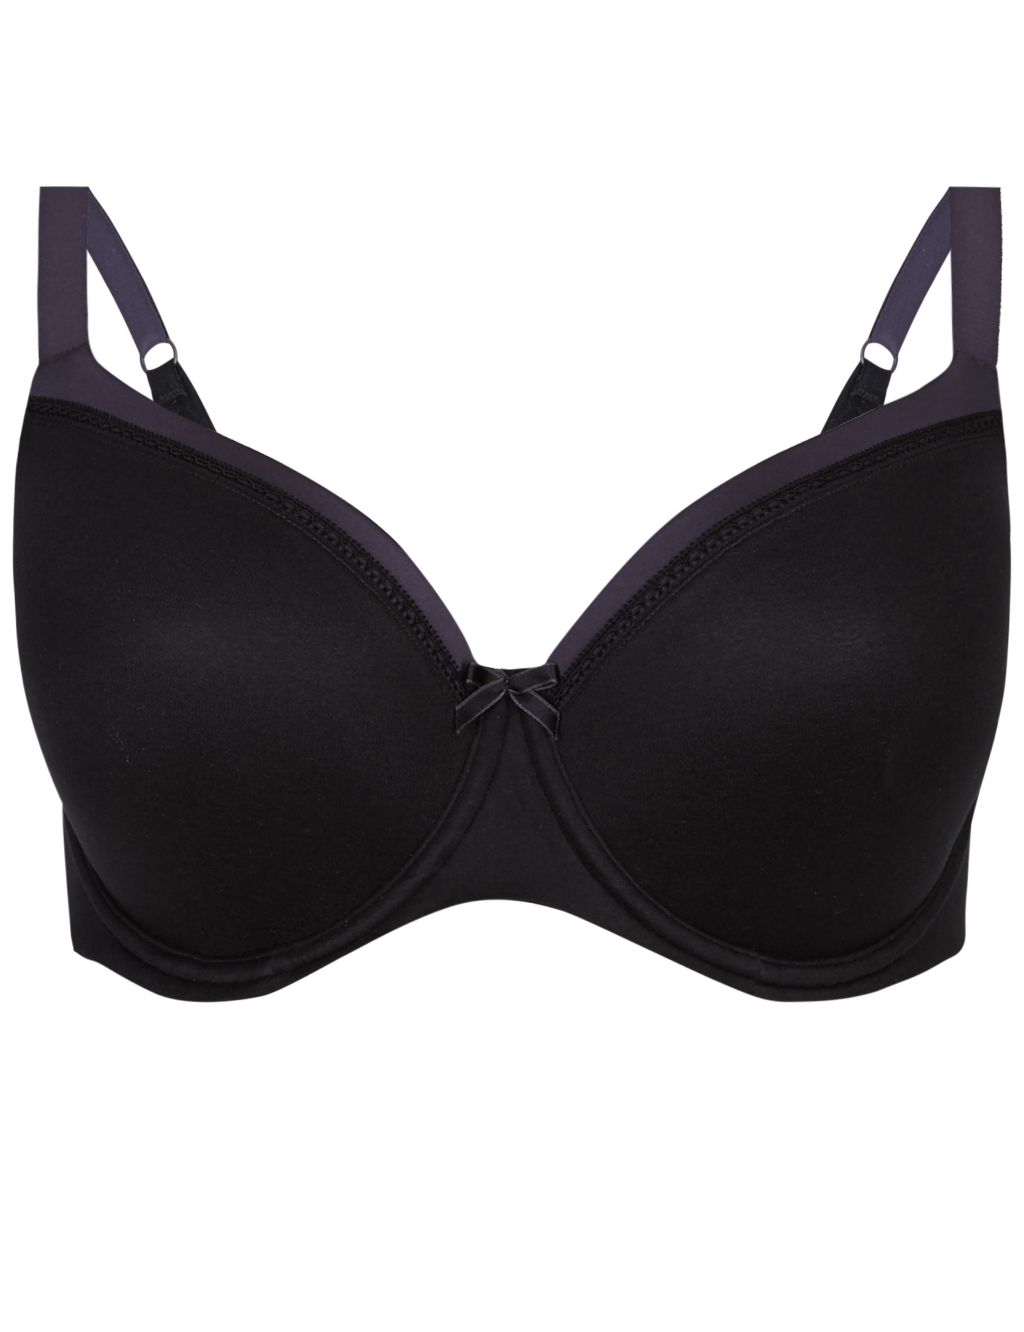 Sumptuously Soft™ Padded Full Cup T-Shirt Bra DD-G | M&S Collection | M&S